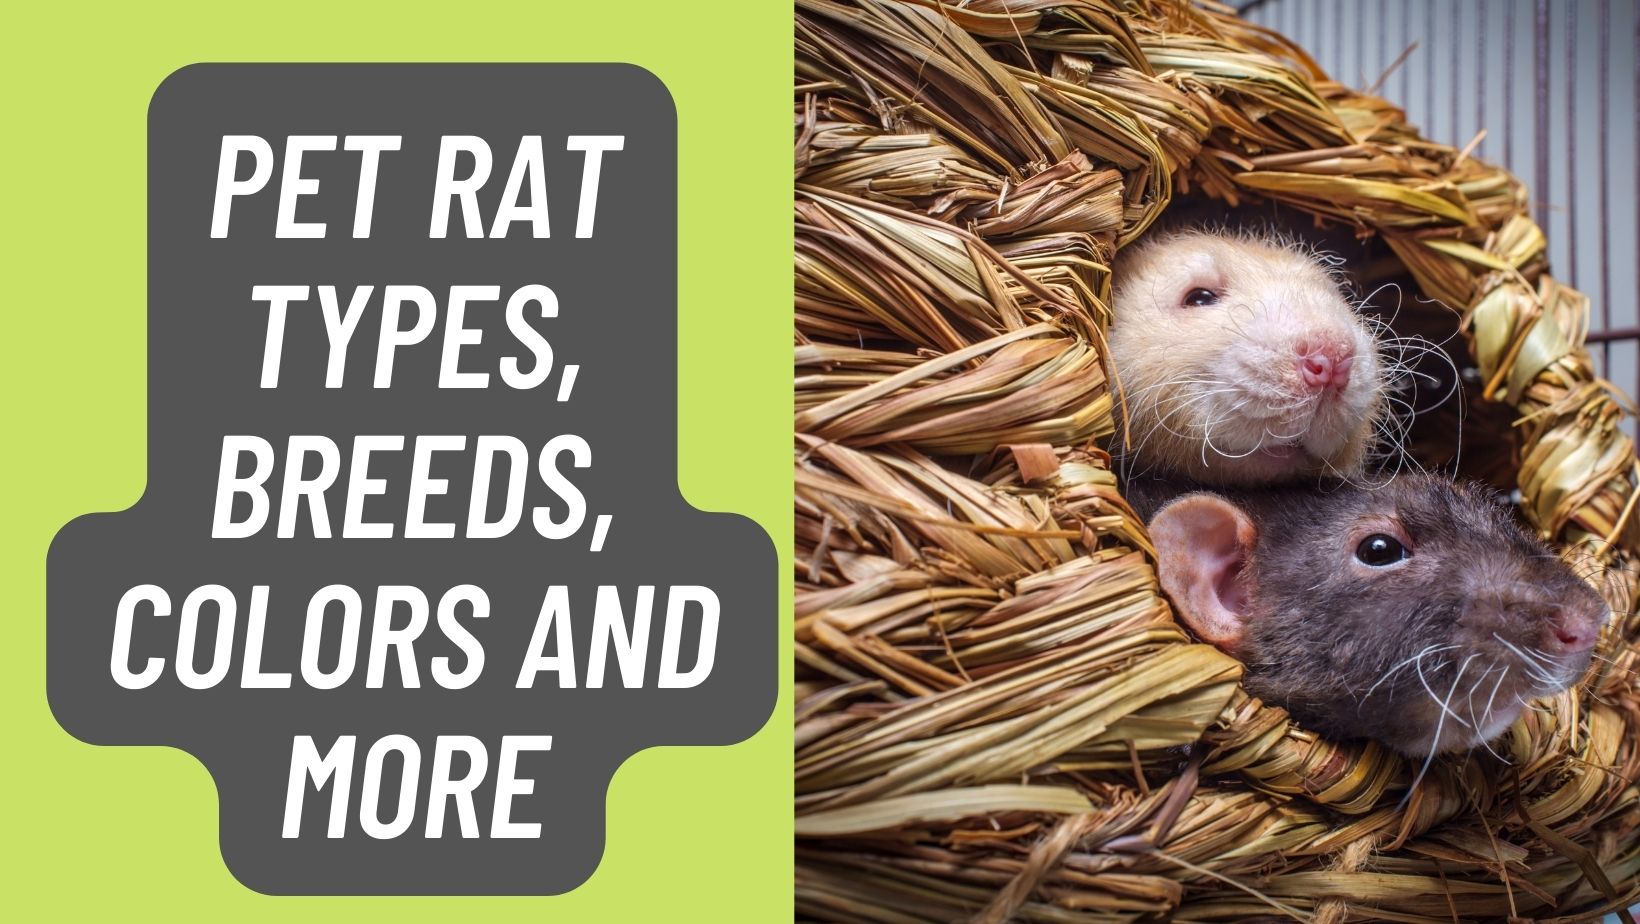 Pet Rat Types, Breeds, Colors and More